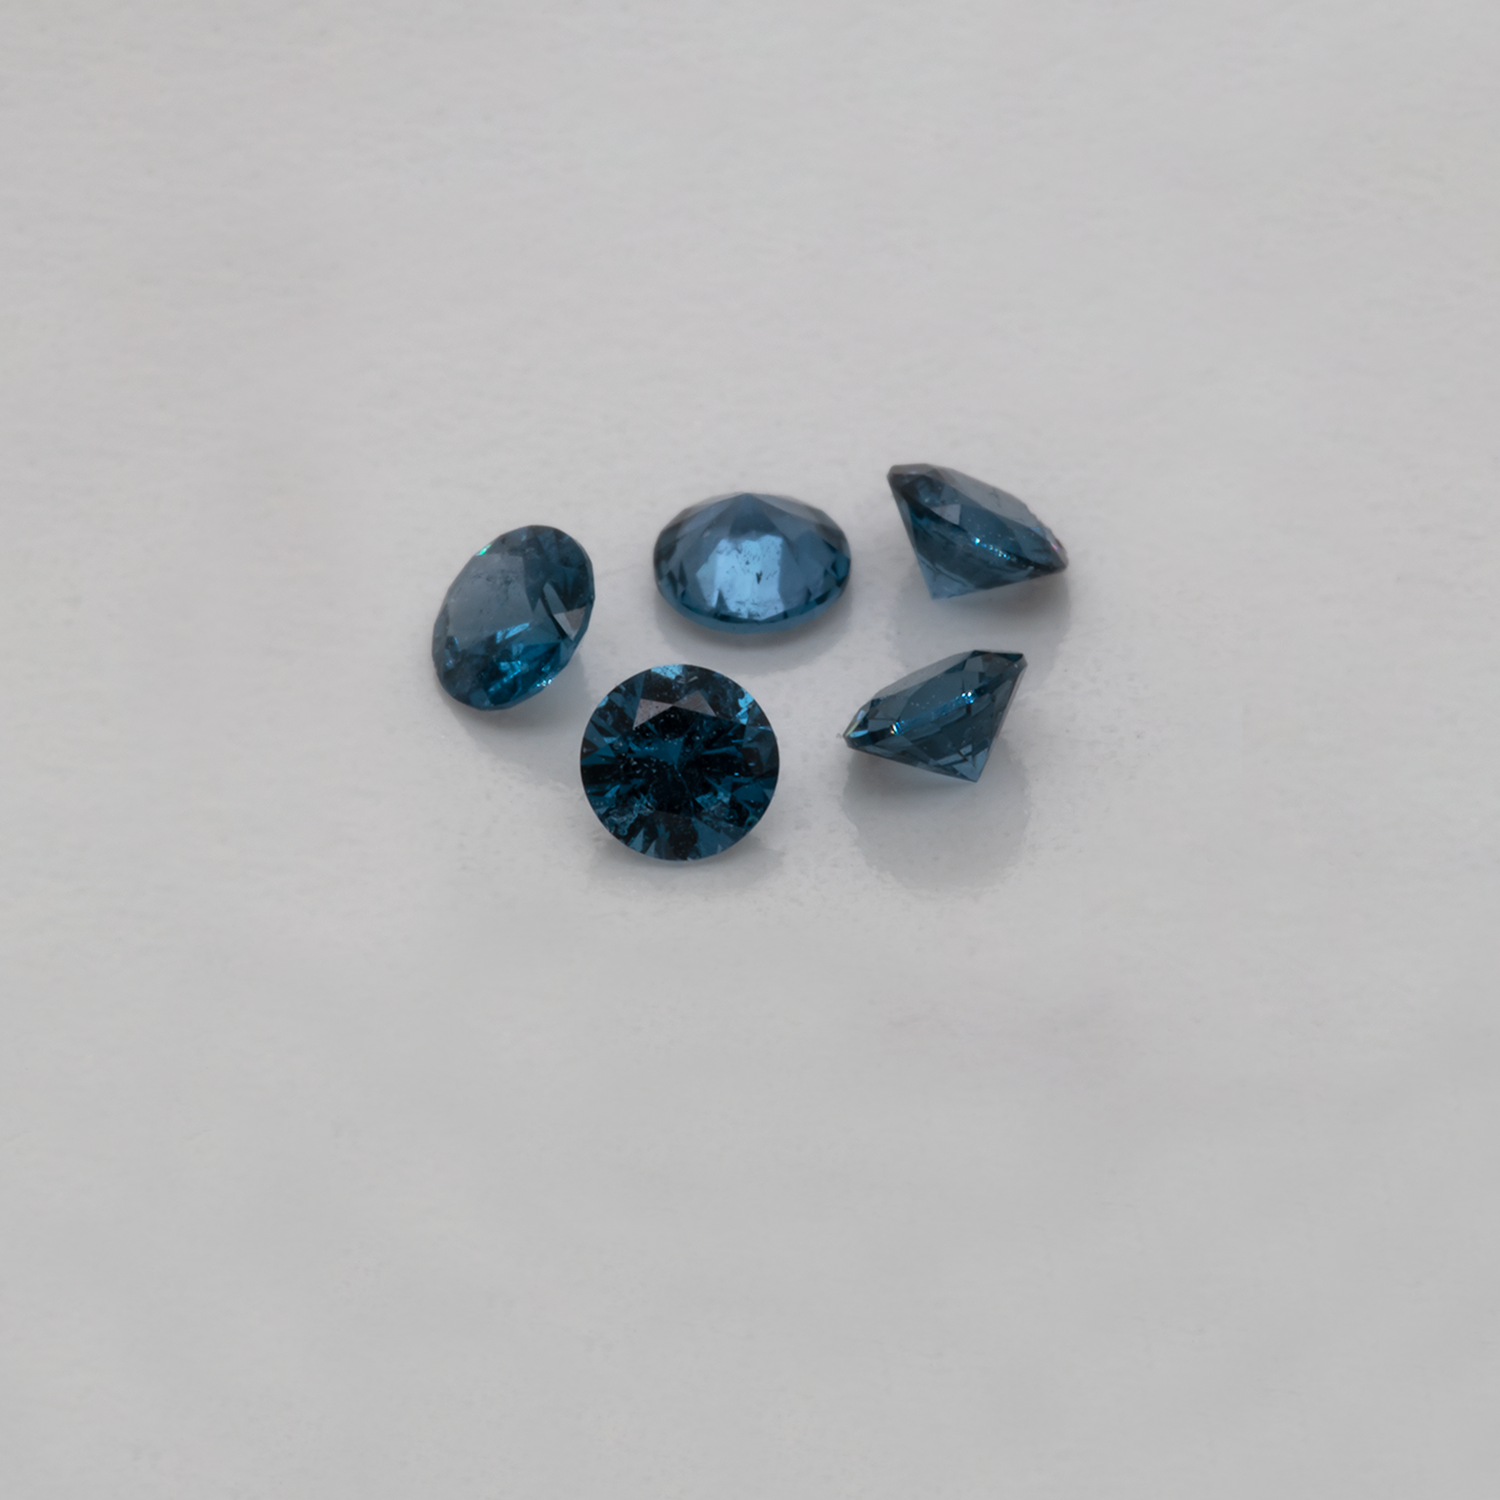 Spinel - blue, round, 2.6x2.6 mm, 0.82-0.89 cts, No. SP90040